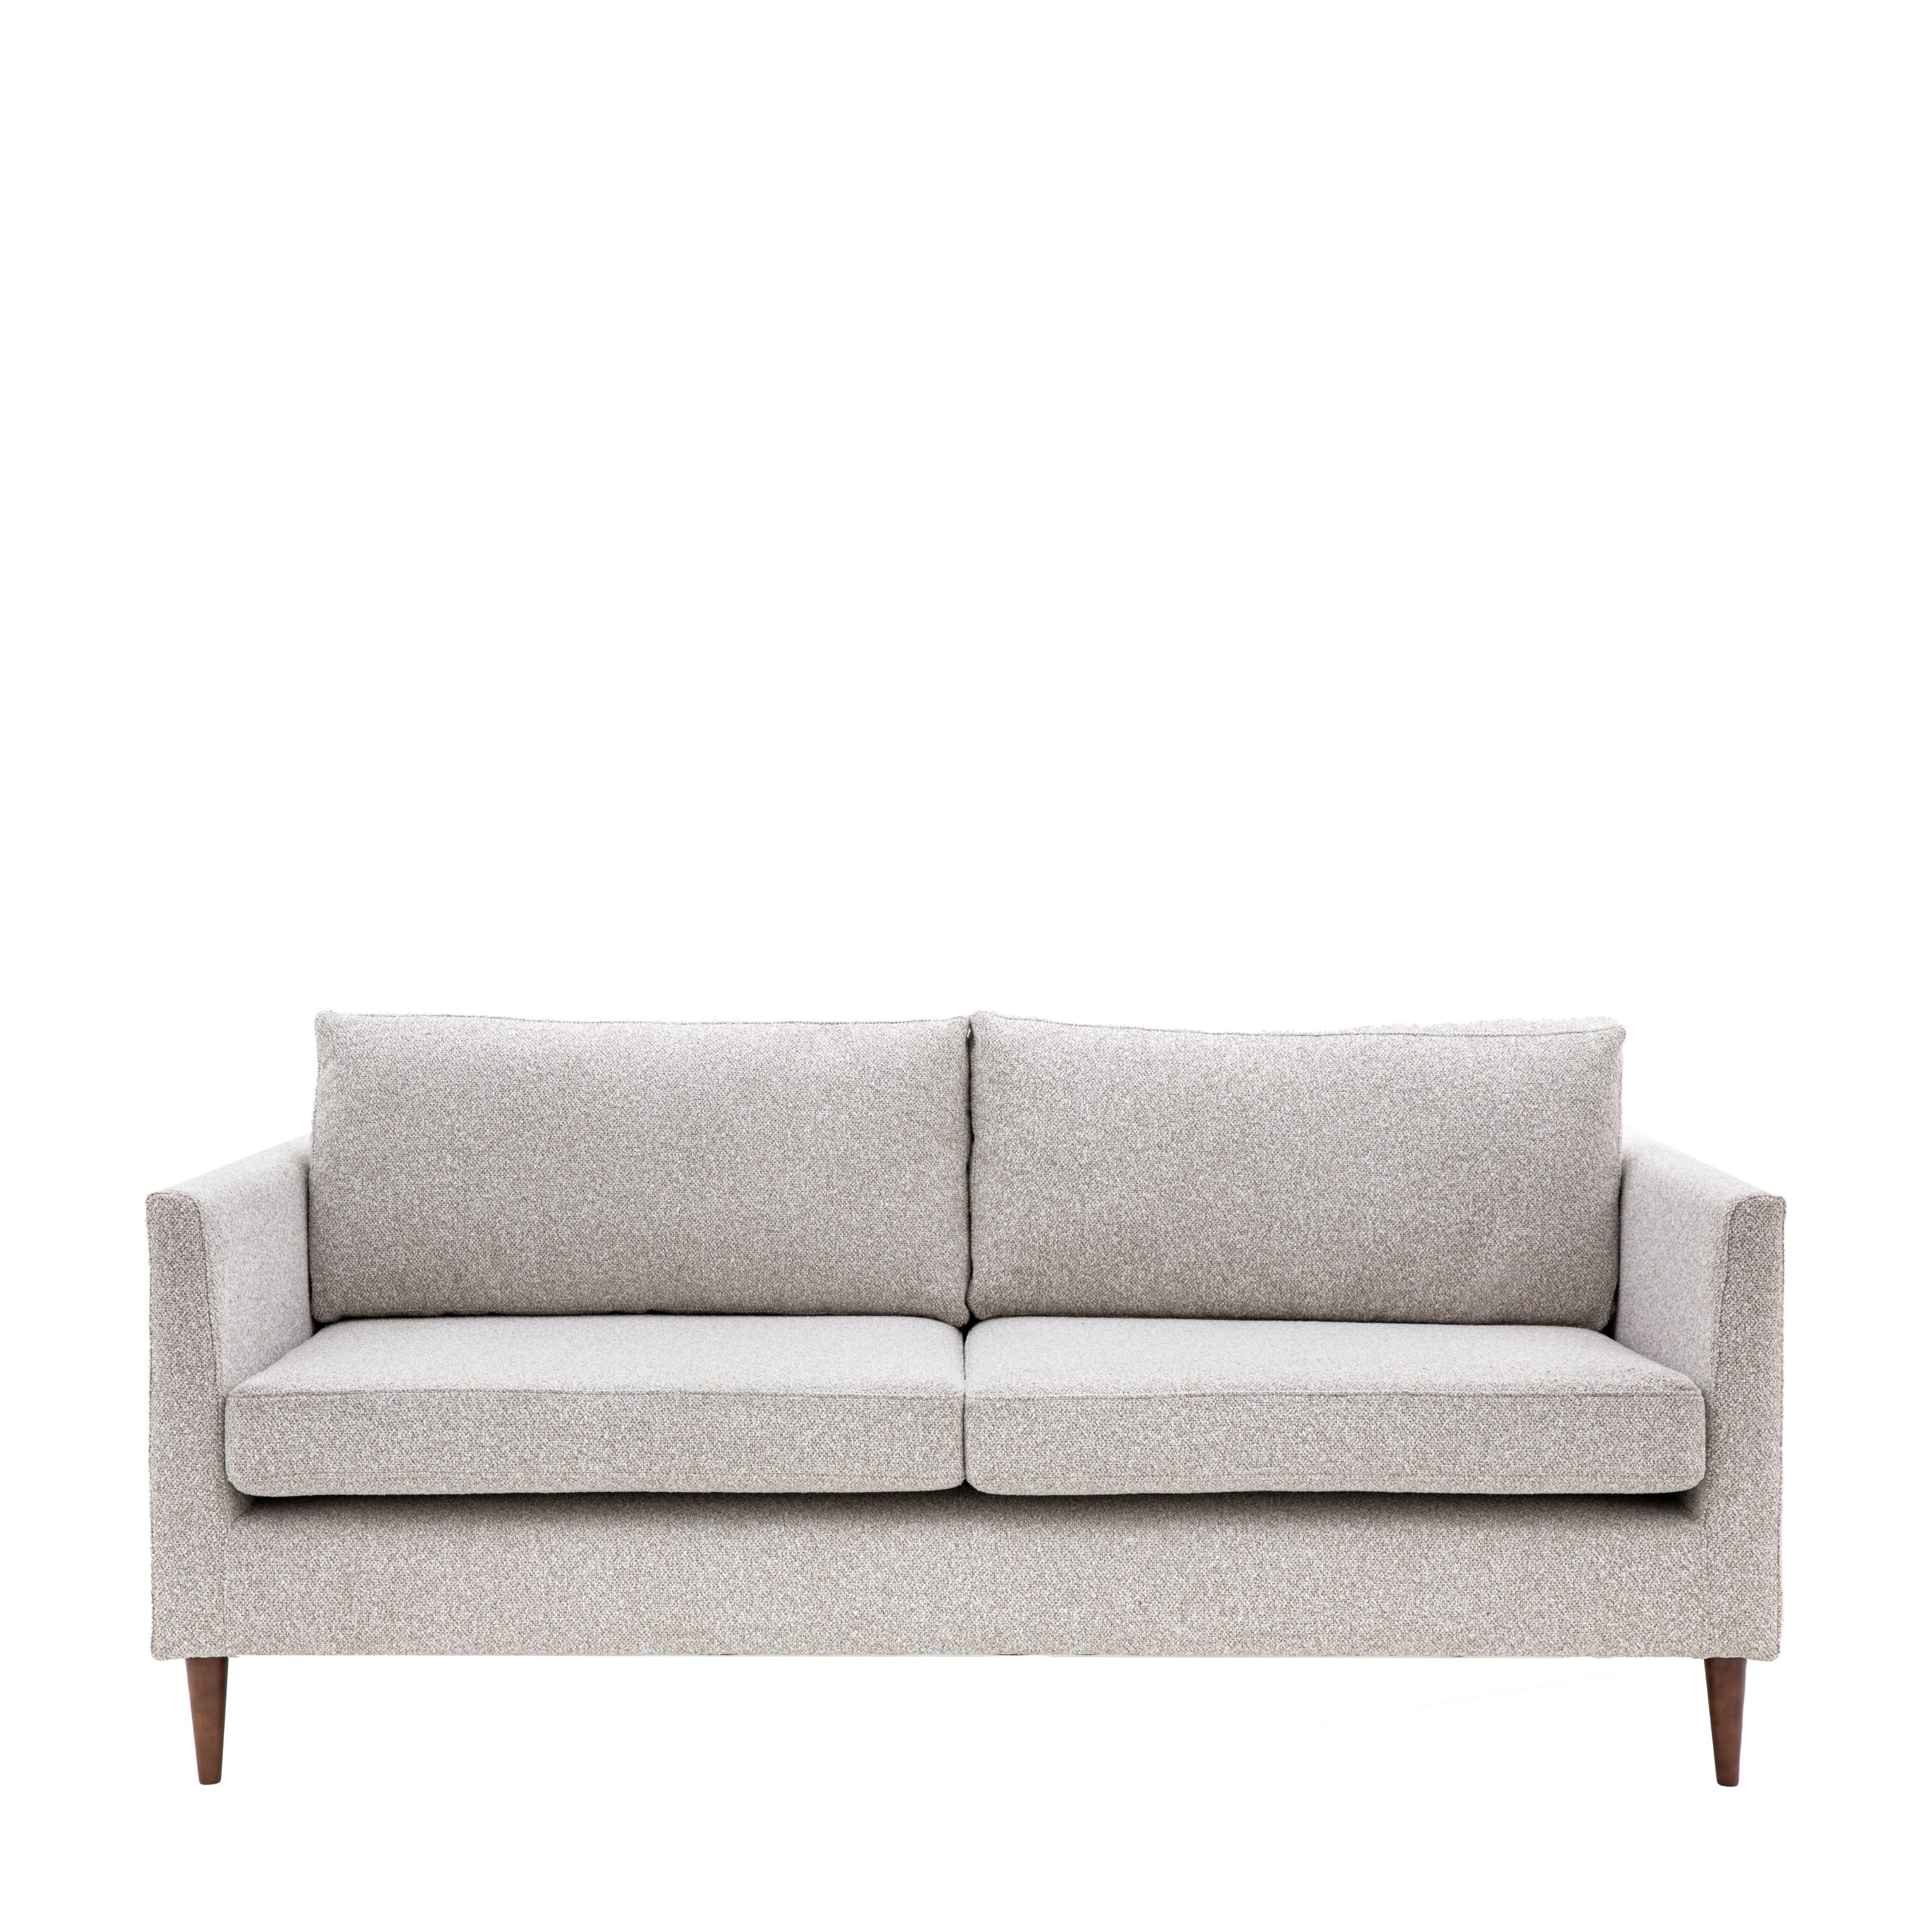 Gallery Direct Gateford Sofa 3 Seater Natural